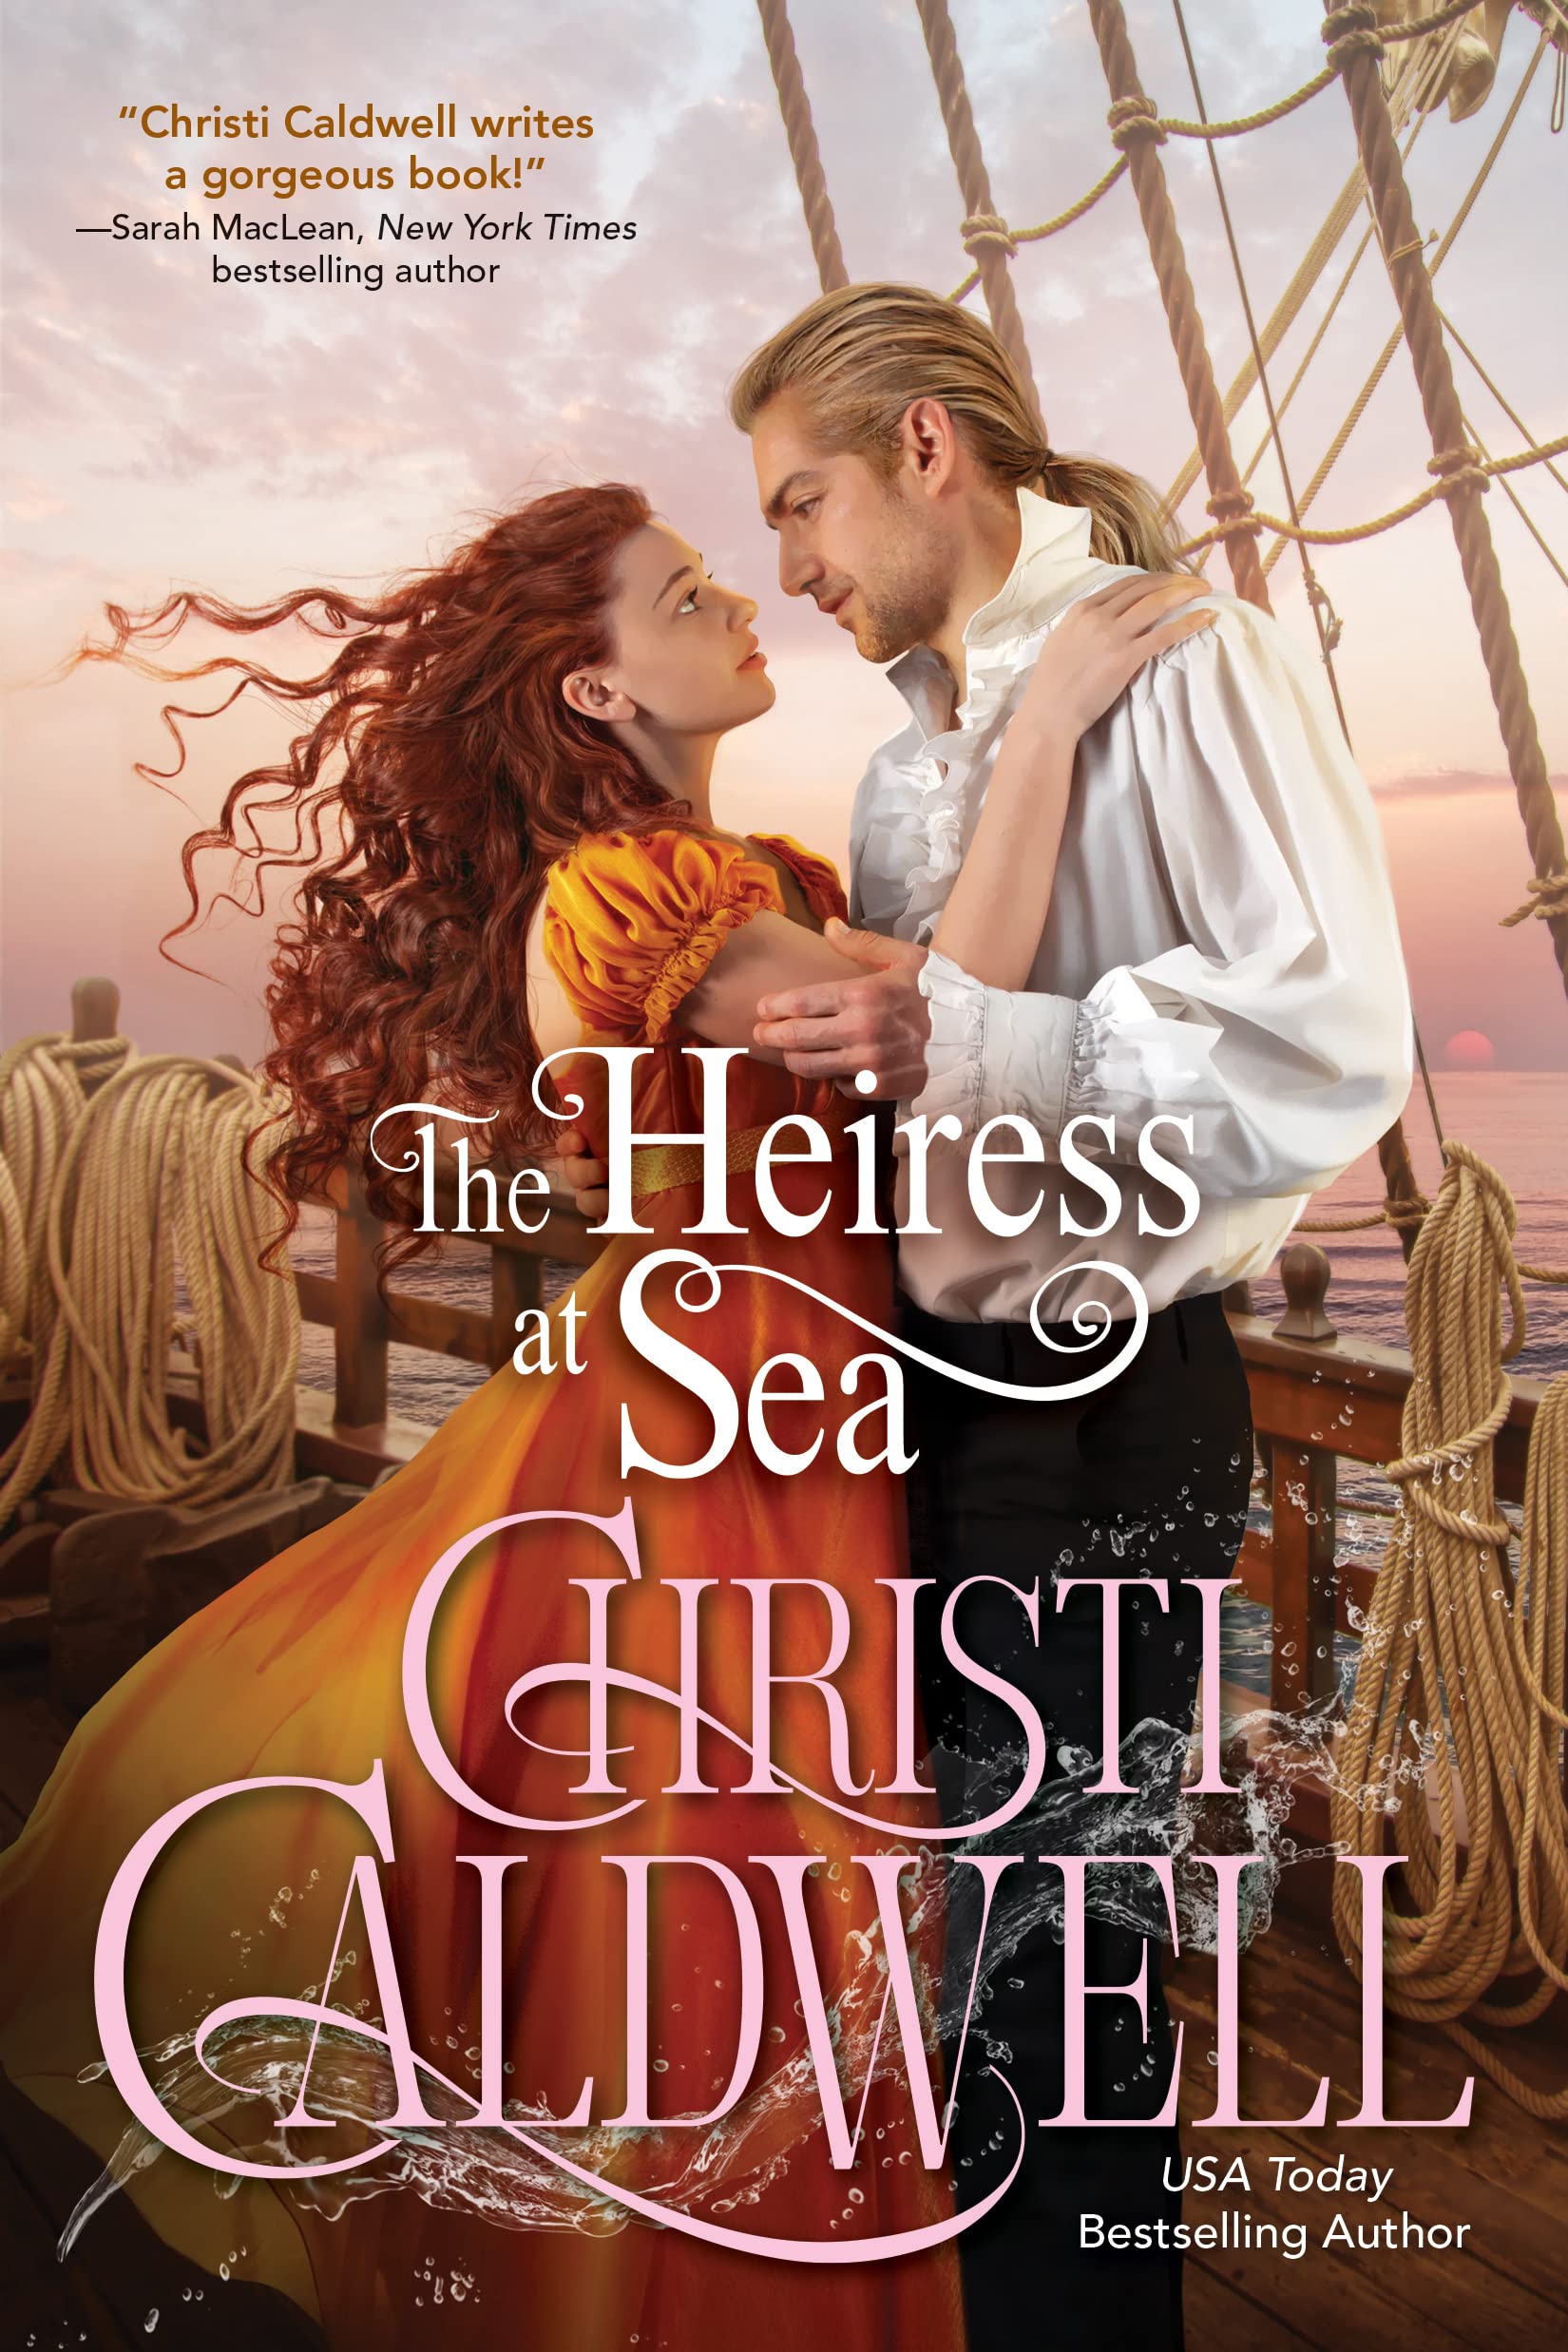 The Heiress at Sea by Christi Caldwell PDF Download